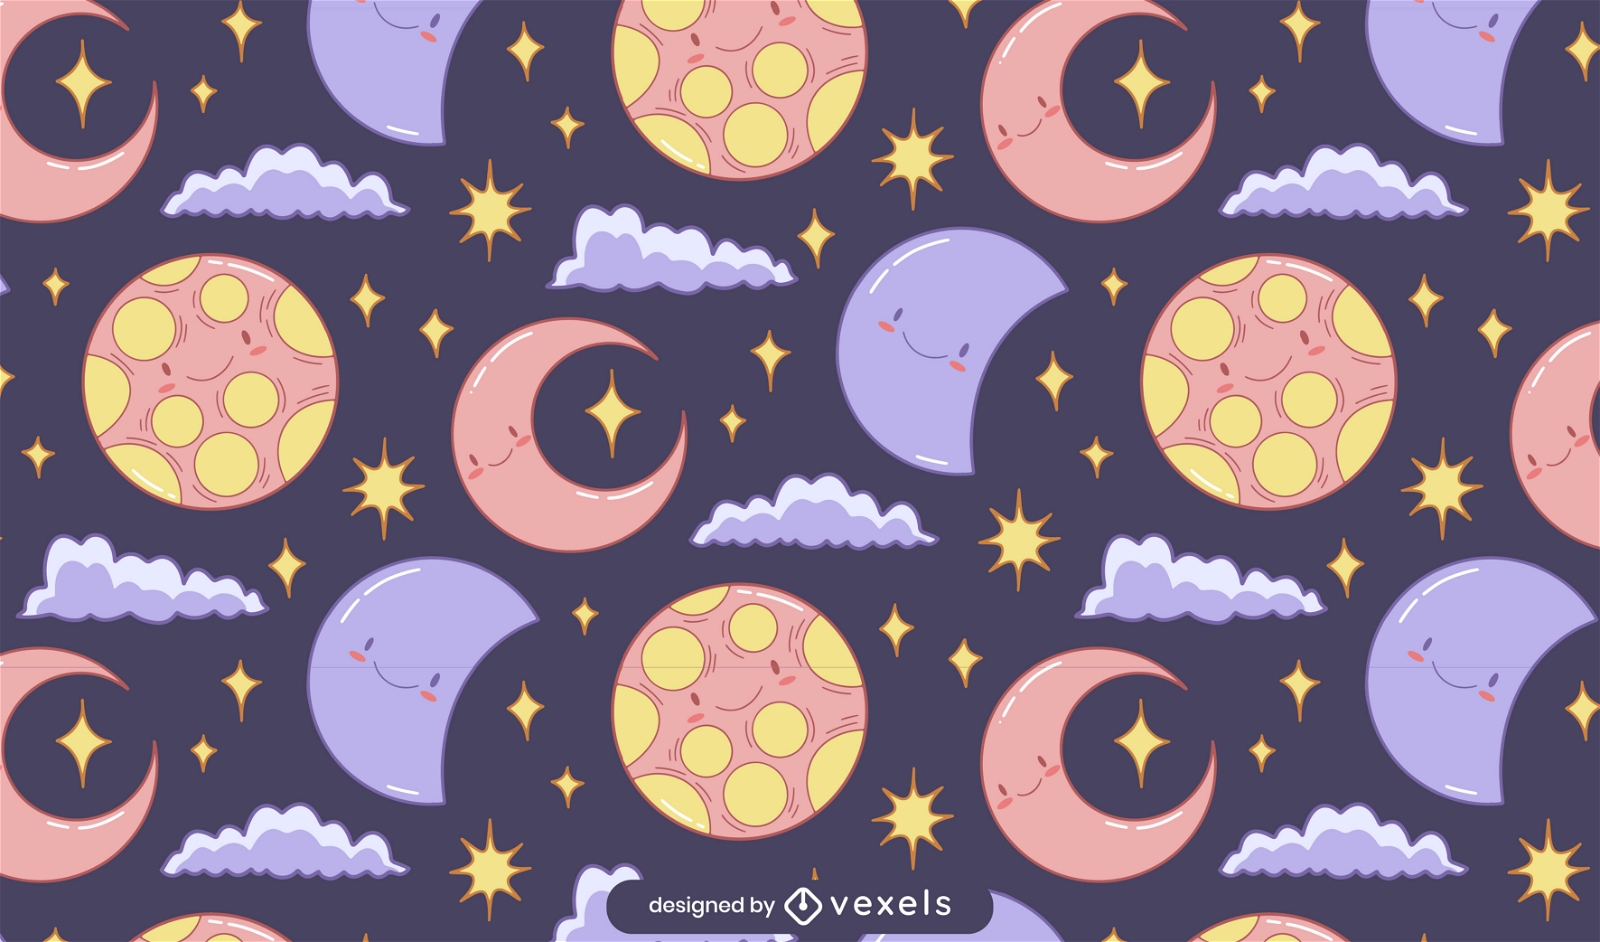 Cute moon and planets pattern design